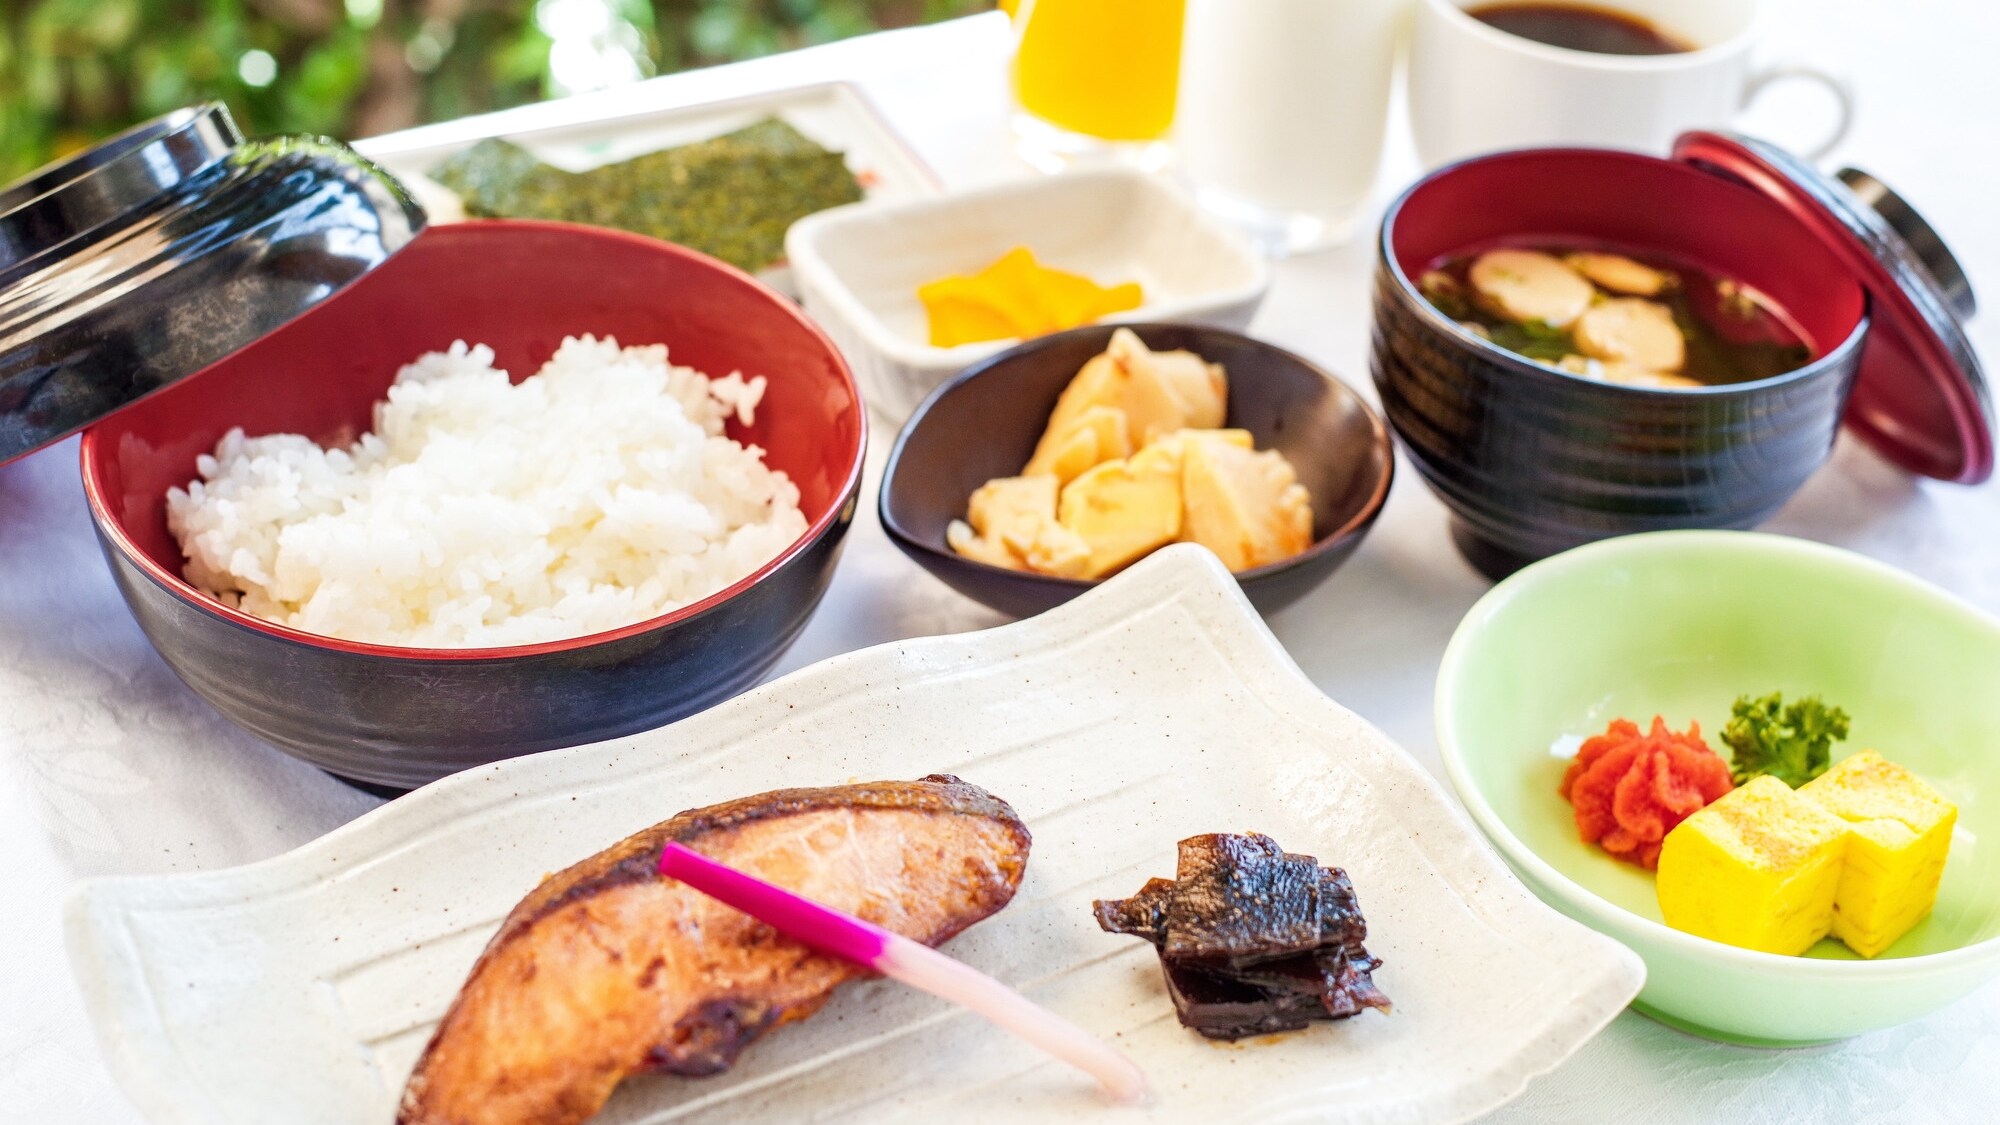 [Breakfast] You can choose either omelet rice or omelet for Japanese food.